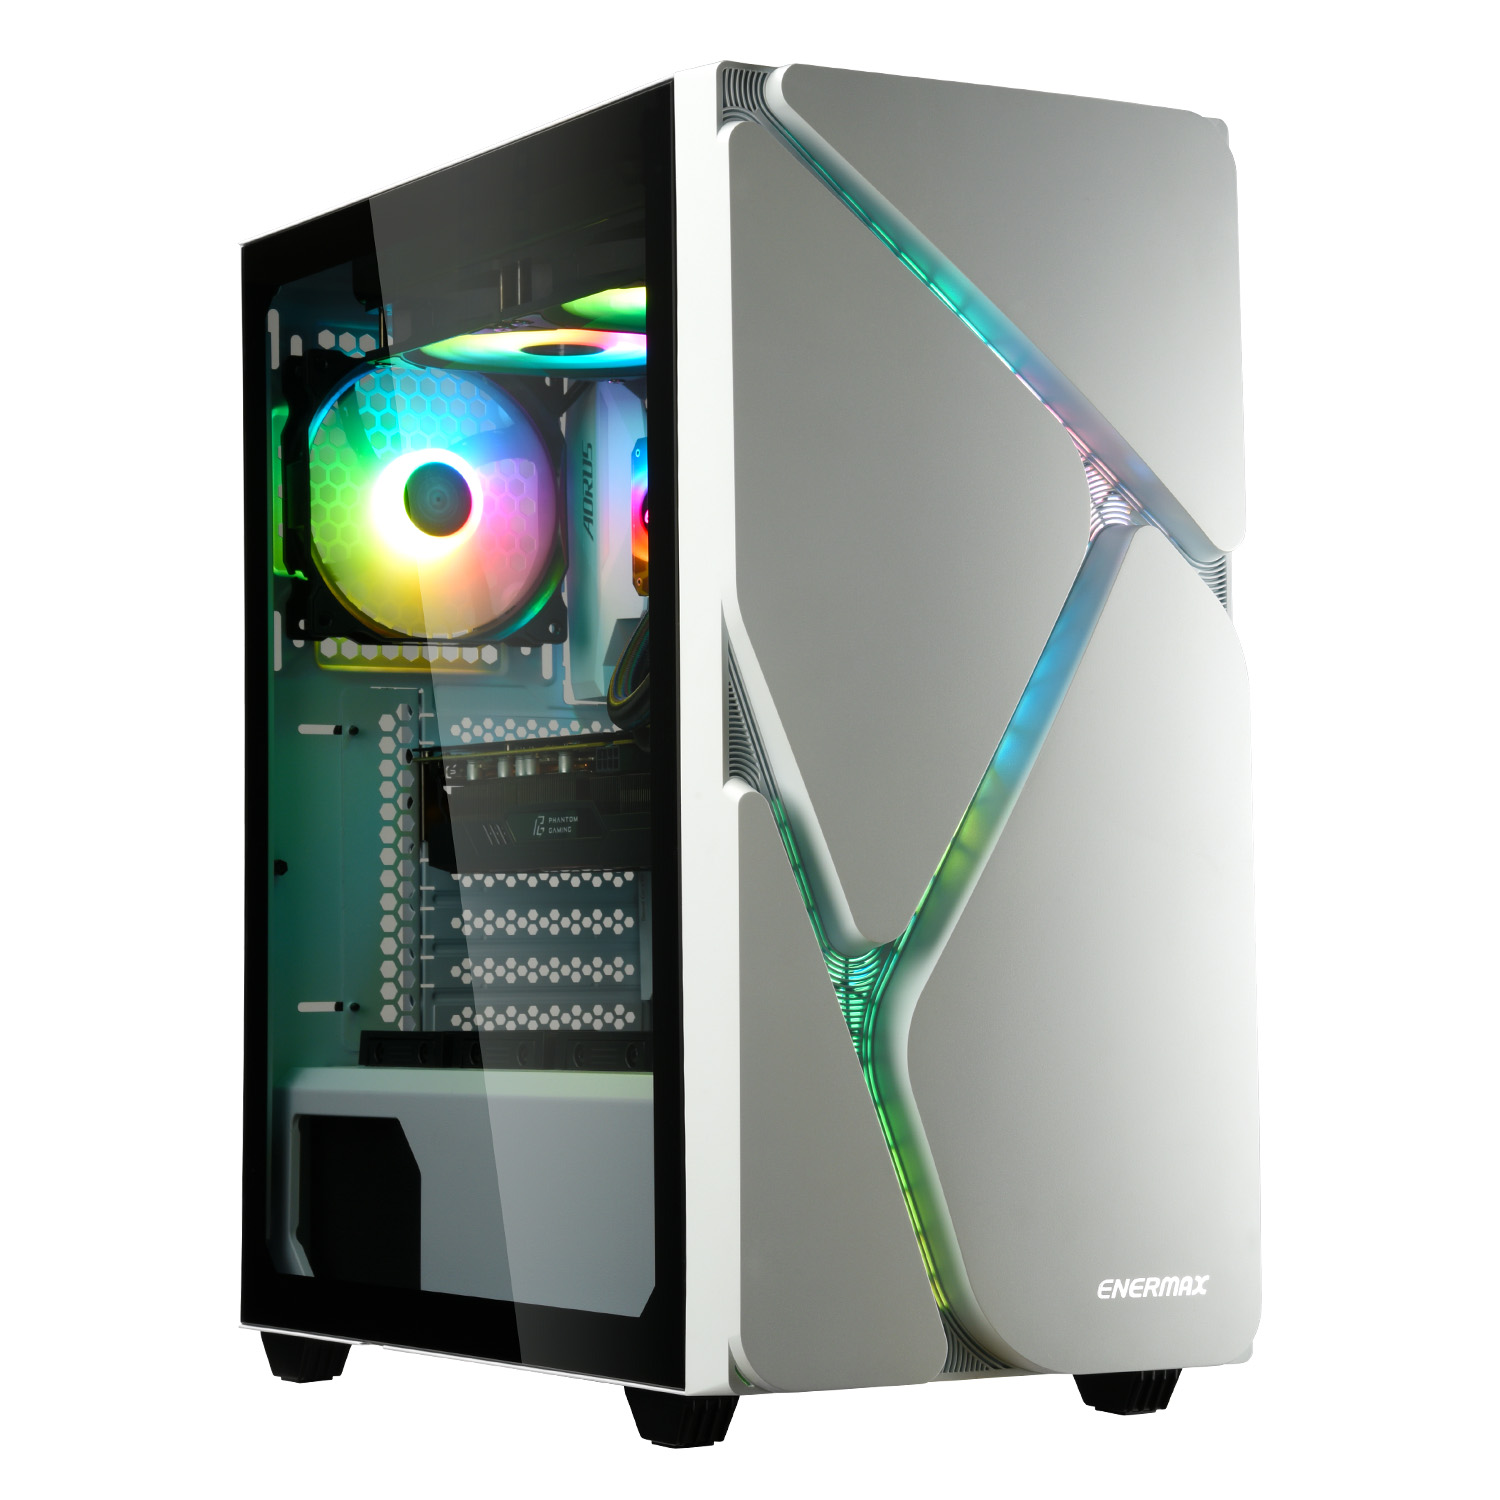 MS30-Marbleshell MS30 Mid-Tower Black/ White PC Case - Products